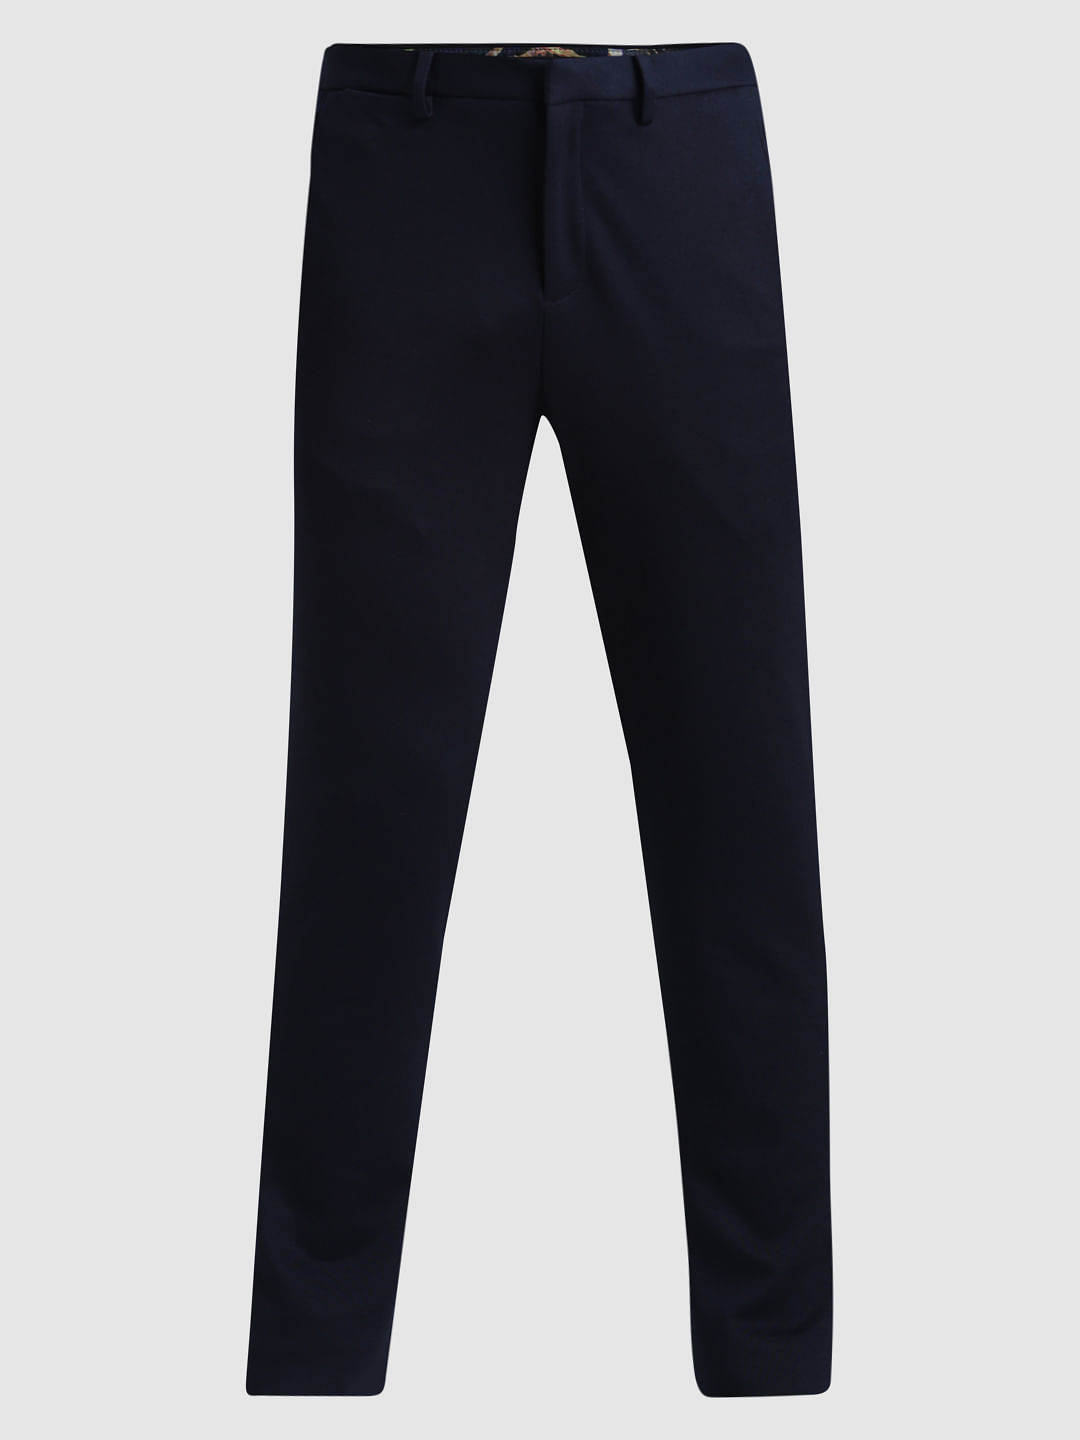 Blue Slim Fit Cotton Pants for Men by GentWith.com | Worldwide Shipping